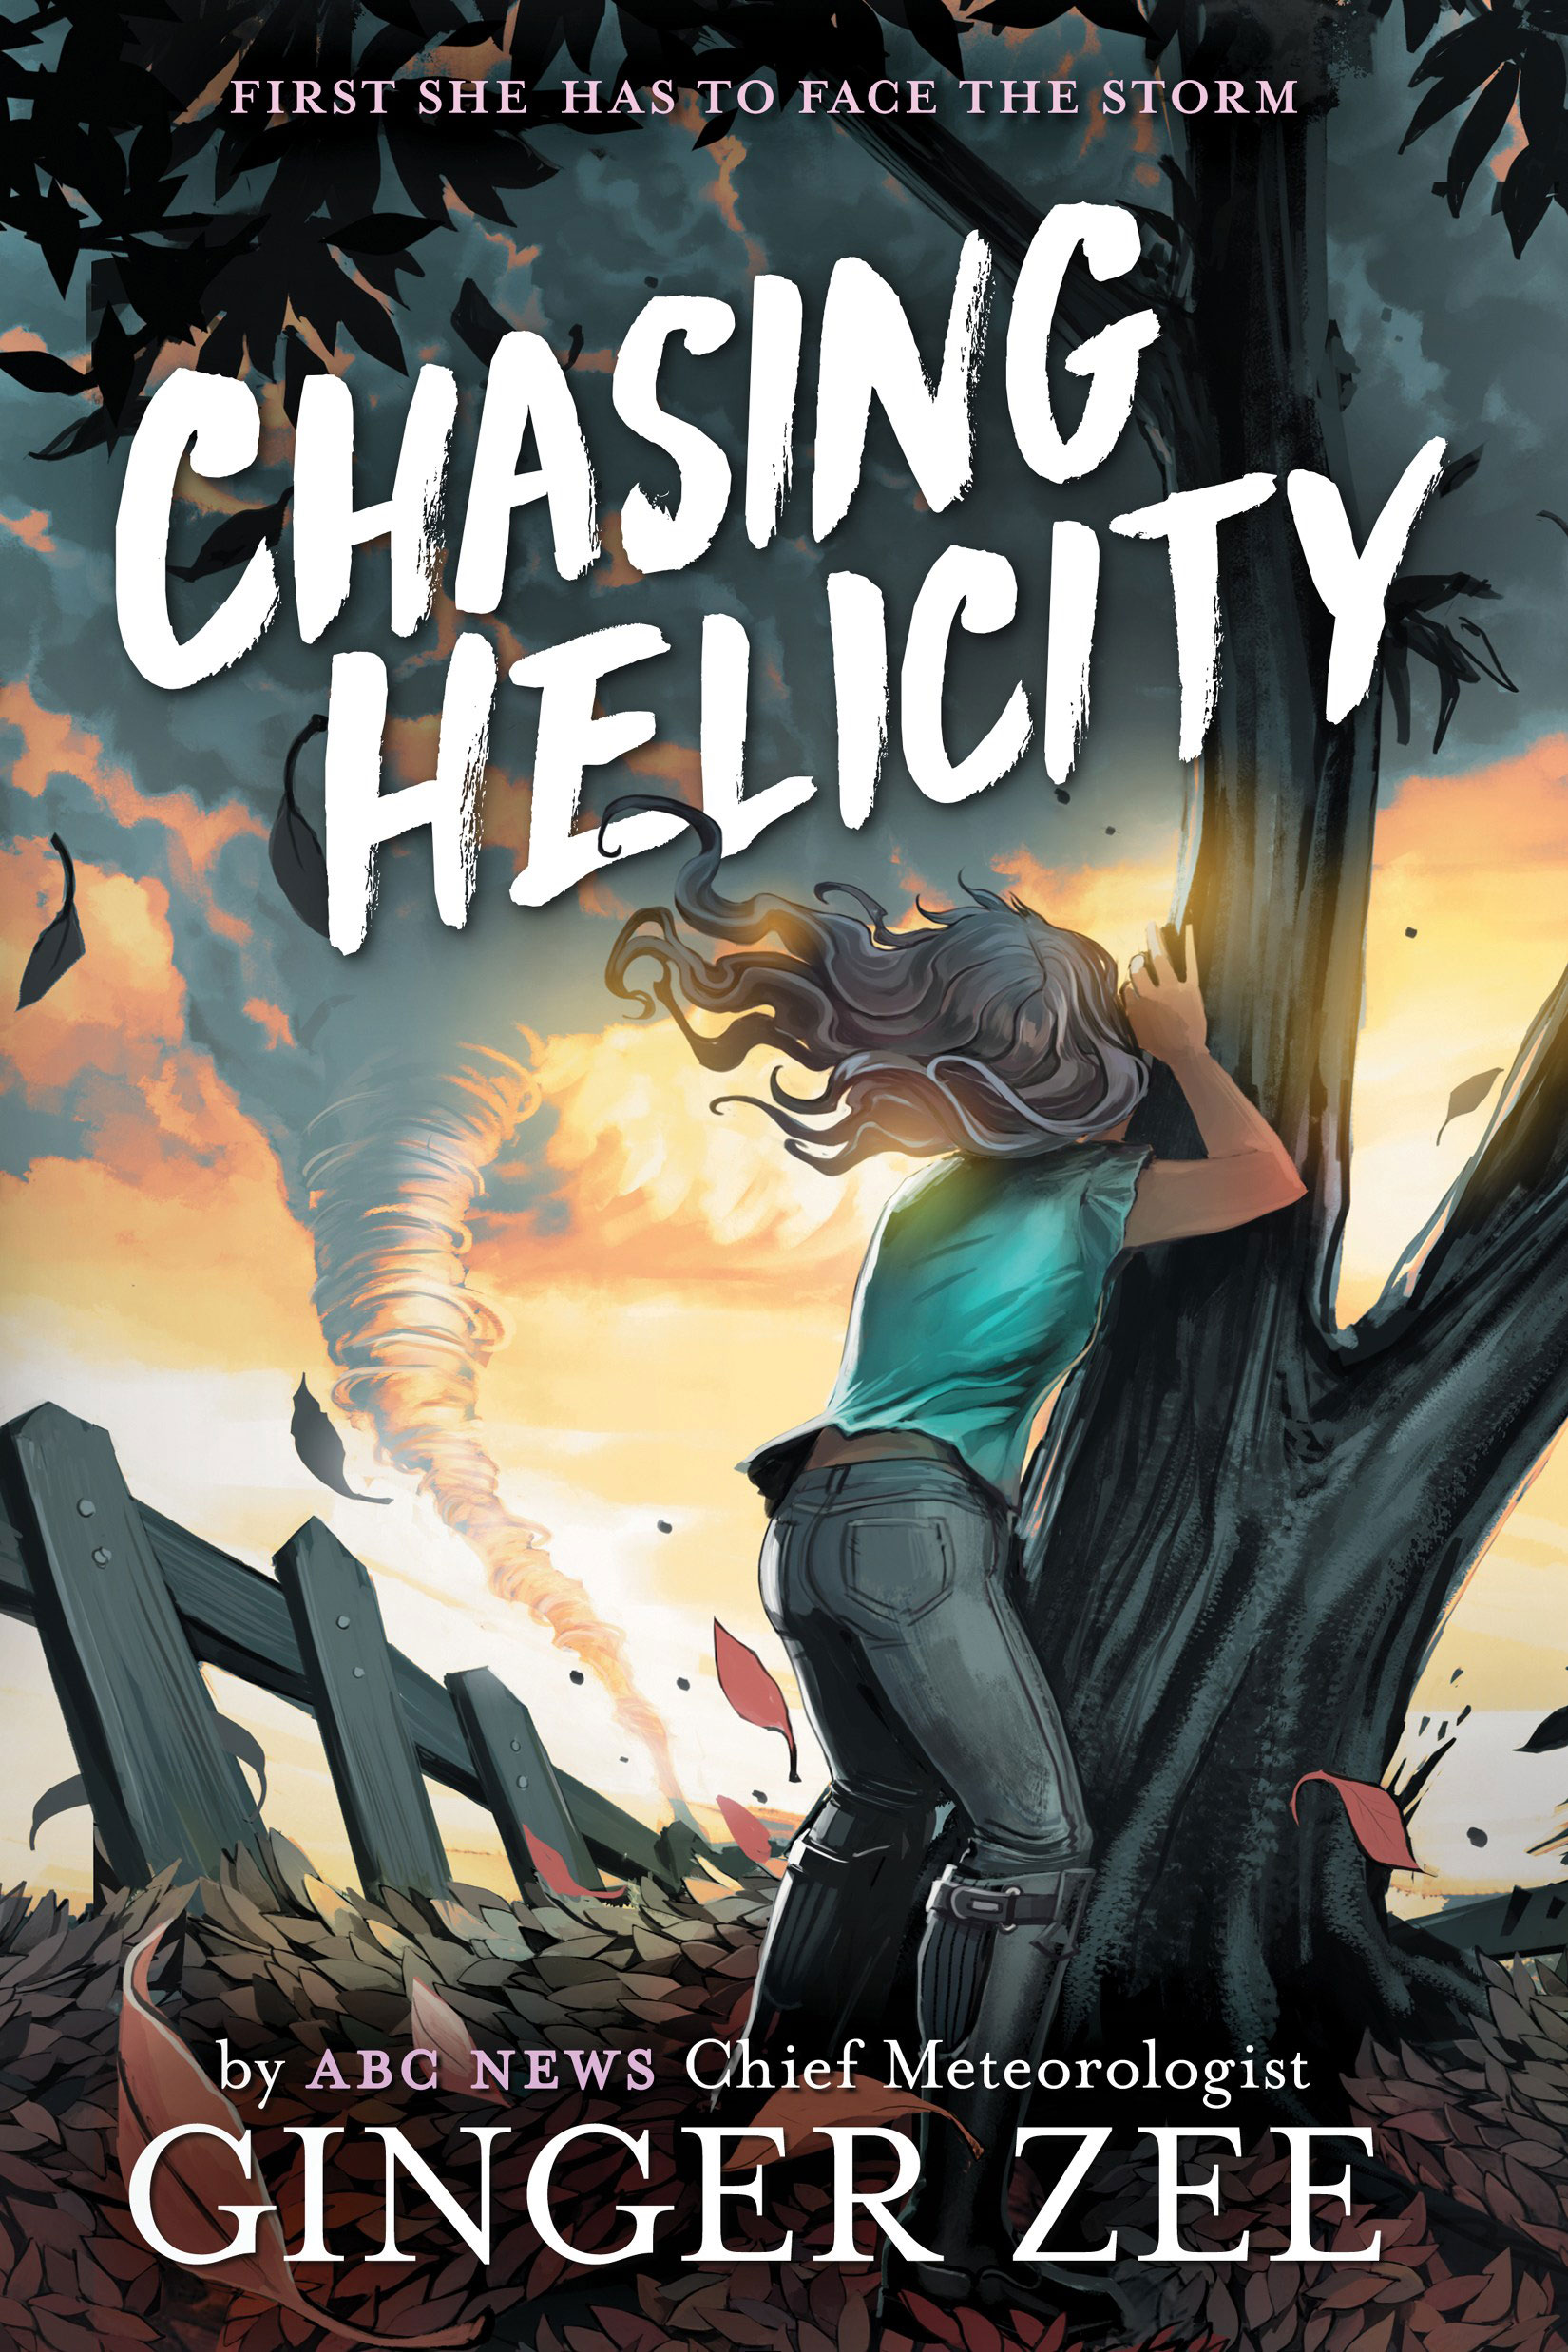 Chasing Helicity